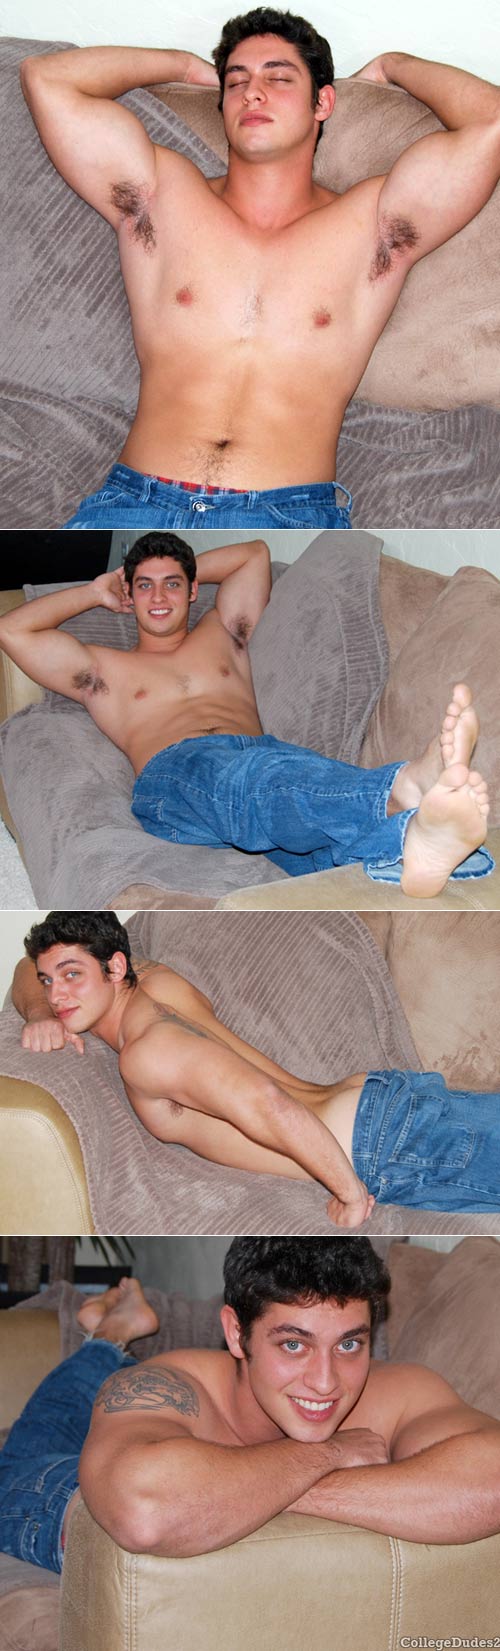 Tony Falco (Busts A Nut) at CollegeDudes247